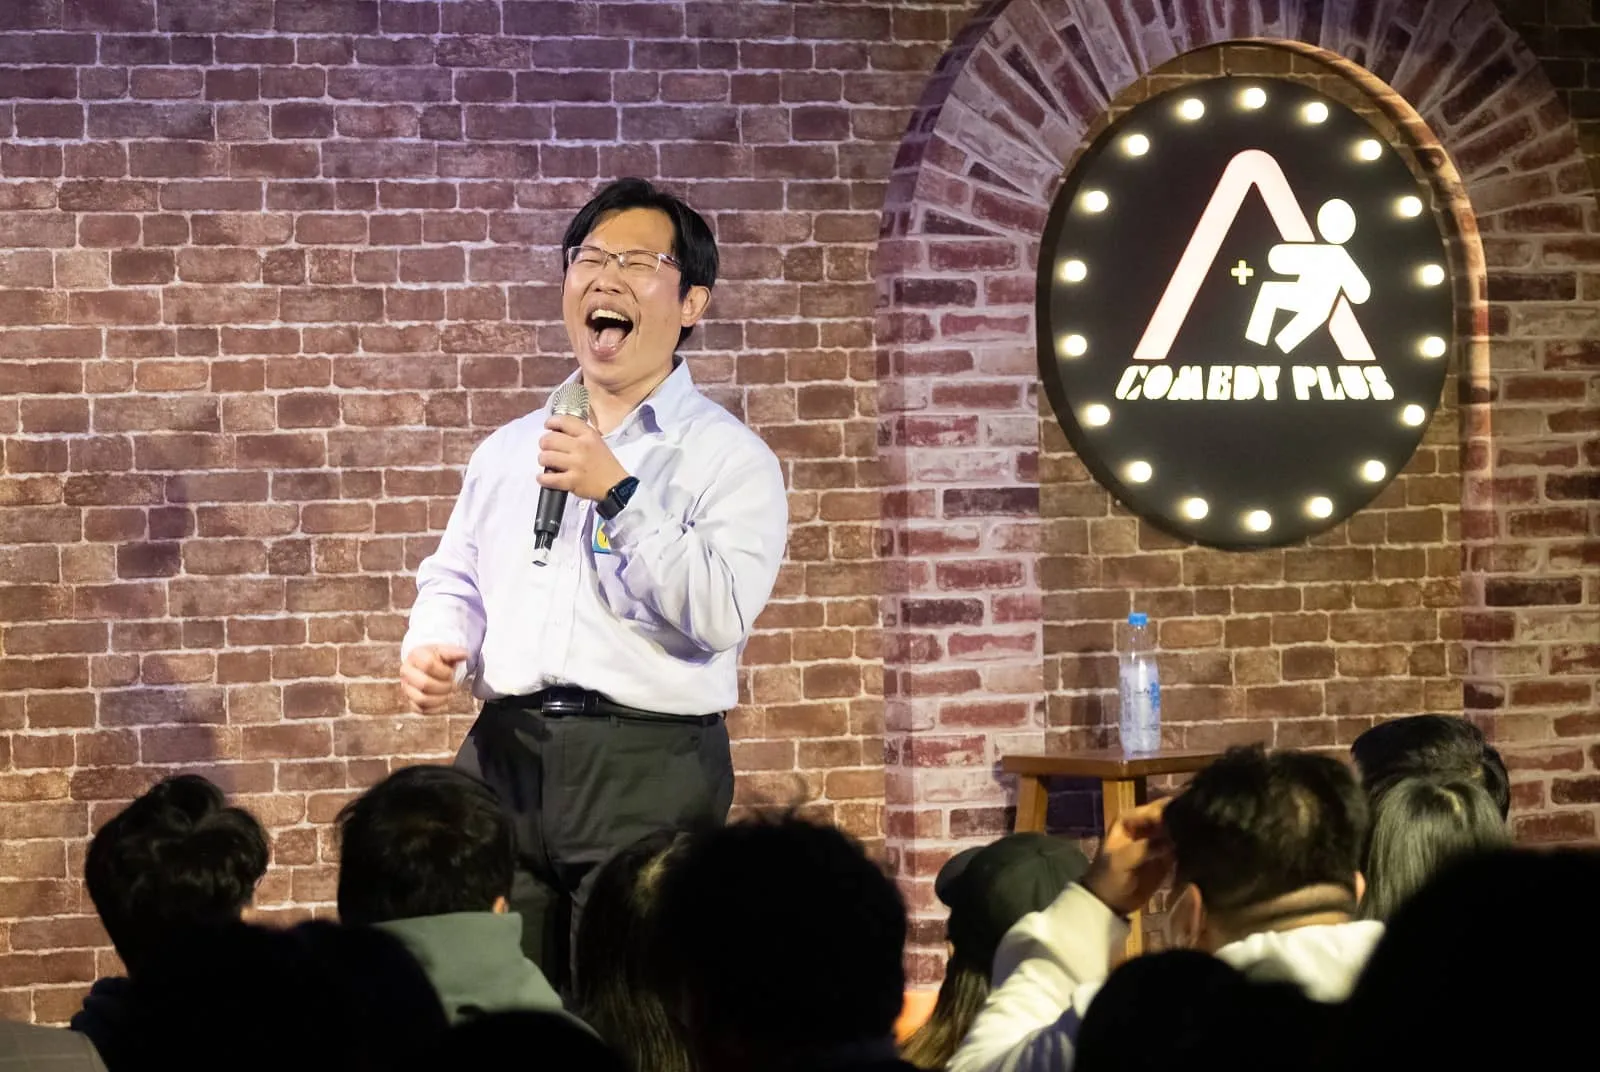 “The stand-up comedian professor uses academic rigor to pursue his interests.” - College of Science Vice Dean Jiun-Tai Chen